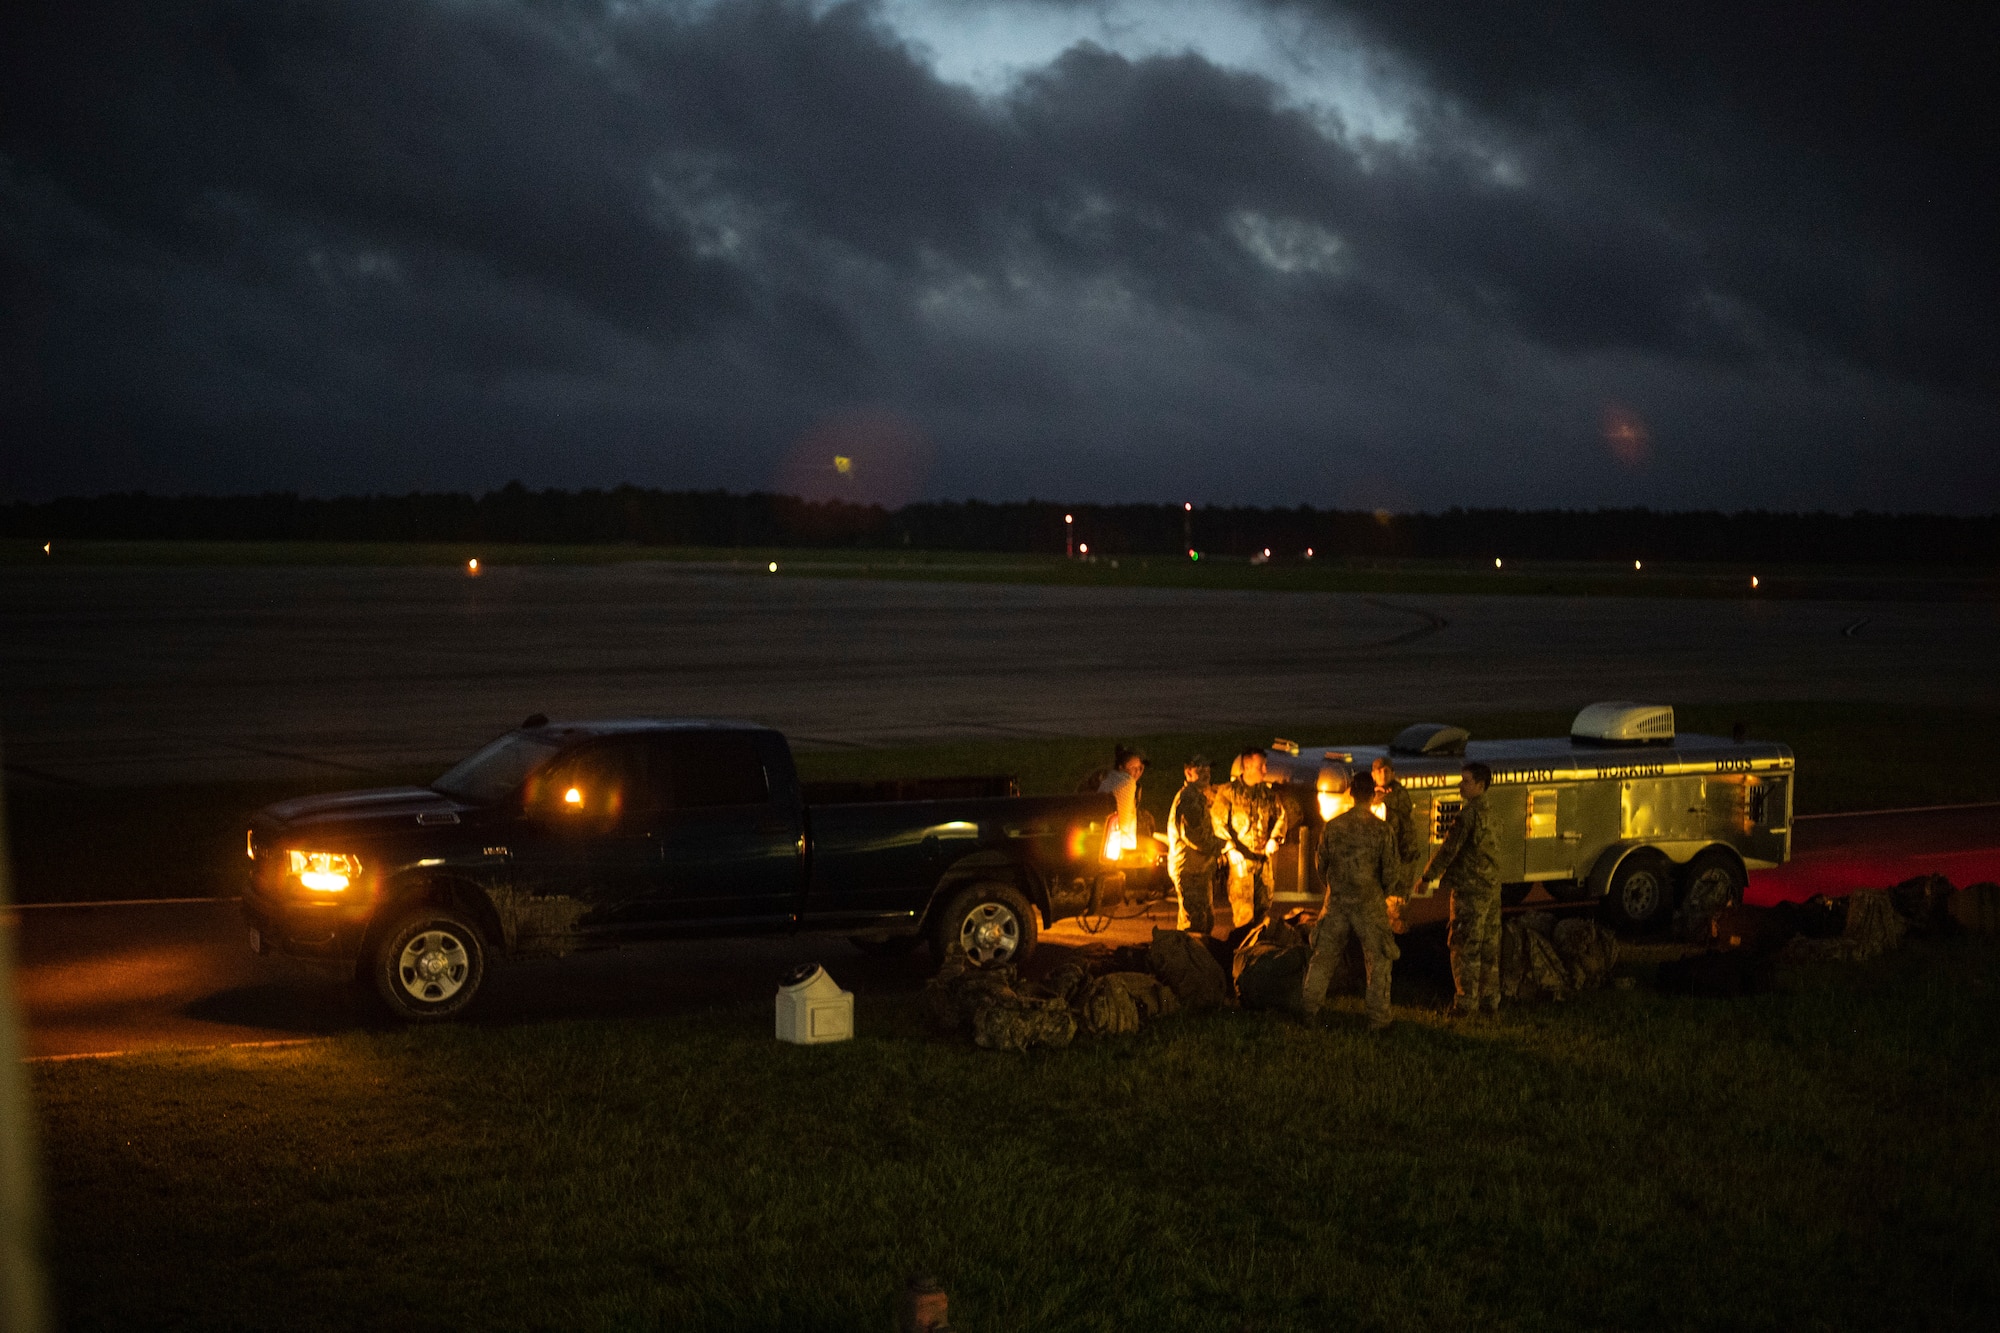 U.S. Air Force Airmen from the 822nd Base Defense Squadron K-9 unit wait near the flight line at Moody Air Force Base, Georgia, Aug. 29, 2021, prior to boarding an HC-130J Combat King II headed to Holloman Air Force Base, New Mexico. The K-9 unit is a force multiplier for the security presence of the 822nd BDS. (U.S. Air Force photo by Master Sgt. Daryl Knee)